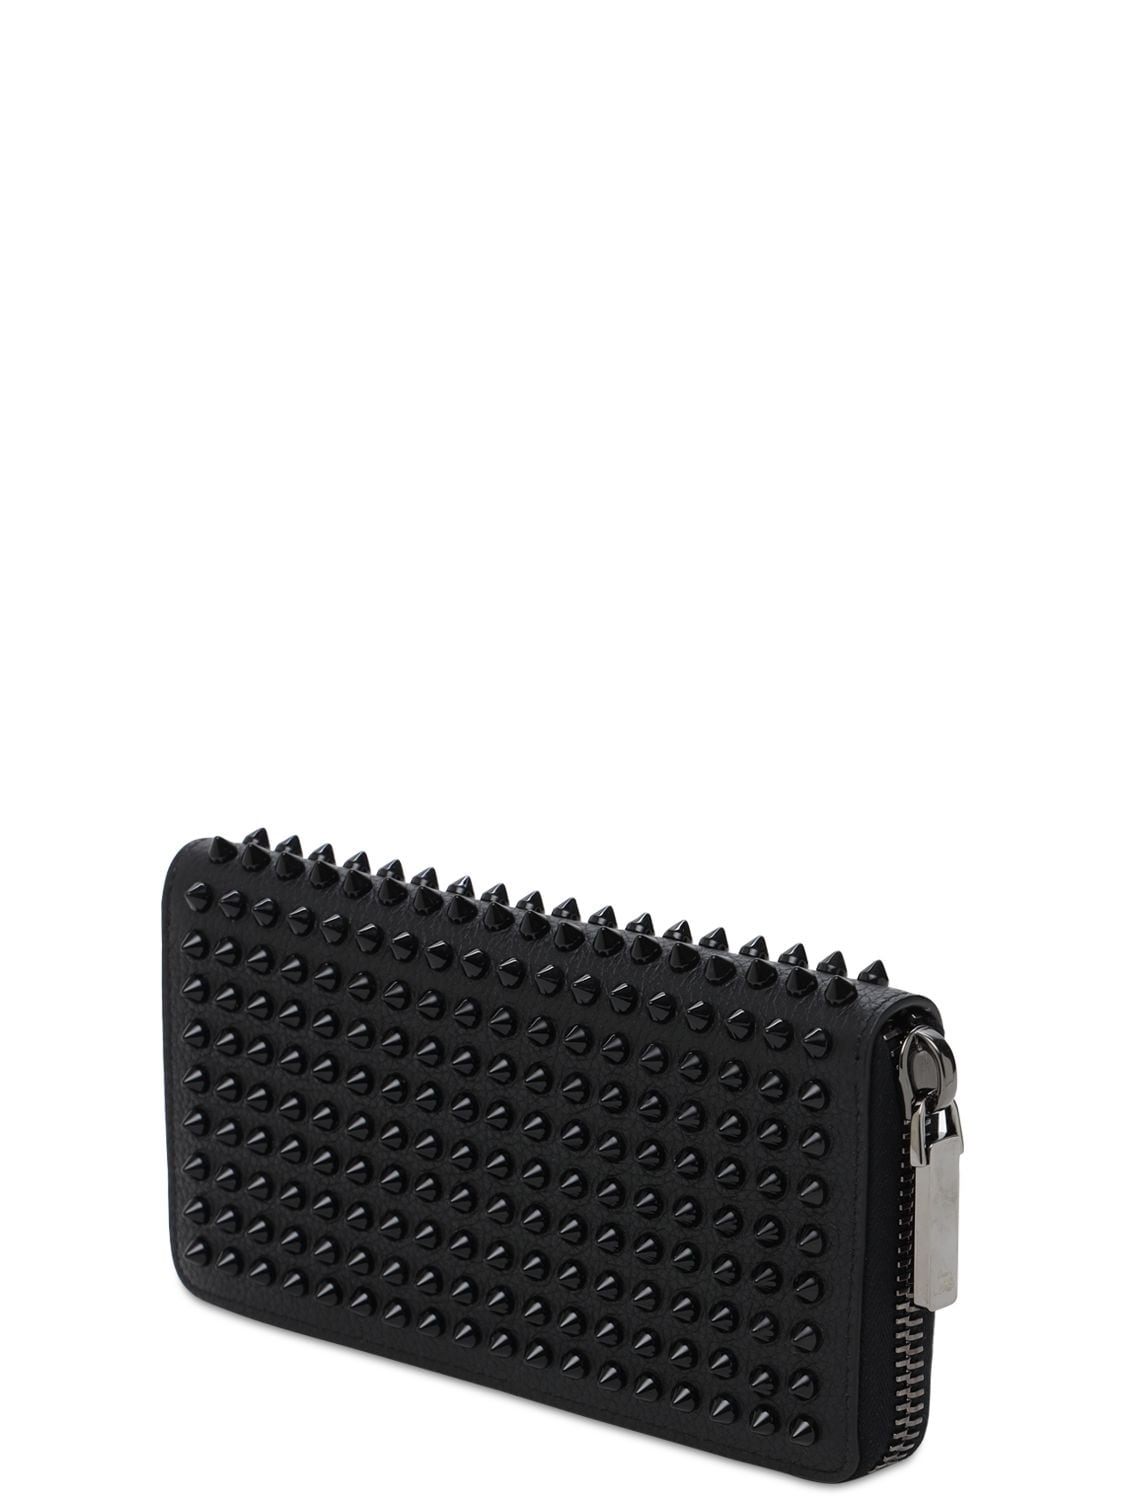 Shop Christian Louboutin Panettone Spiked Leather Zip Wallet In Black